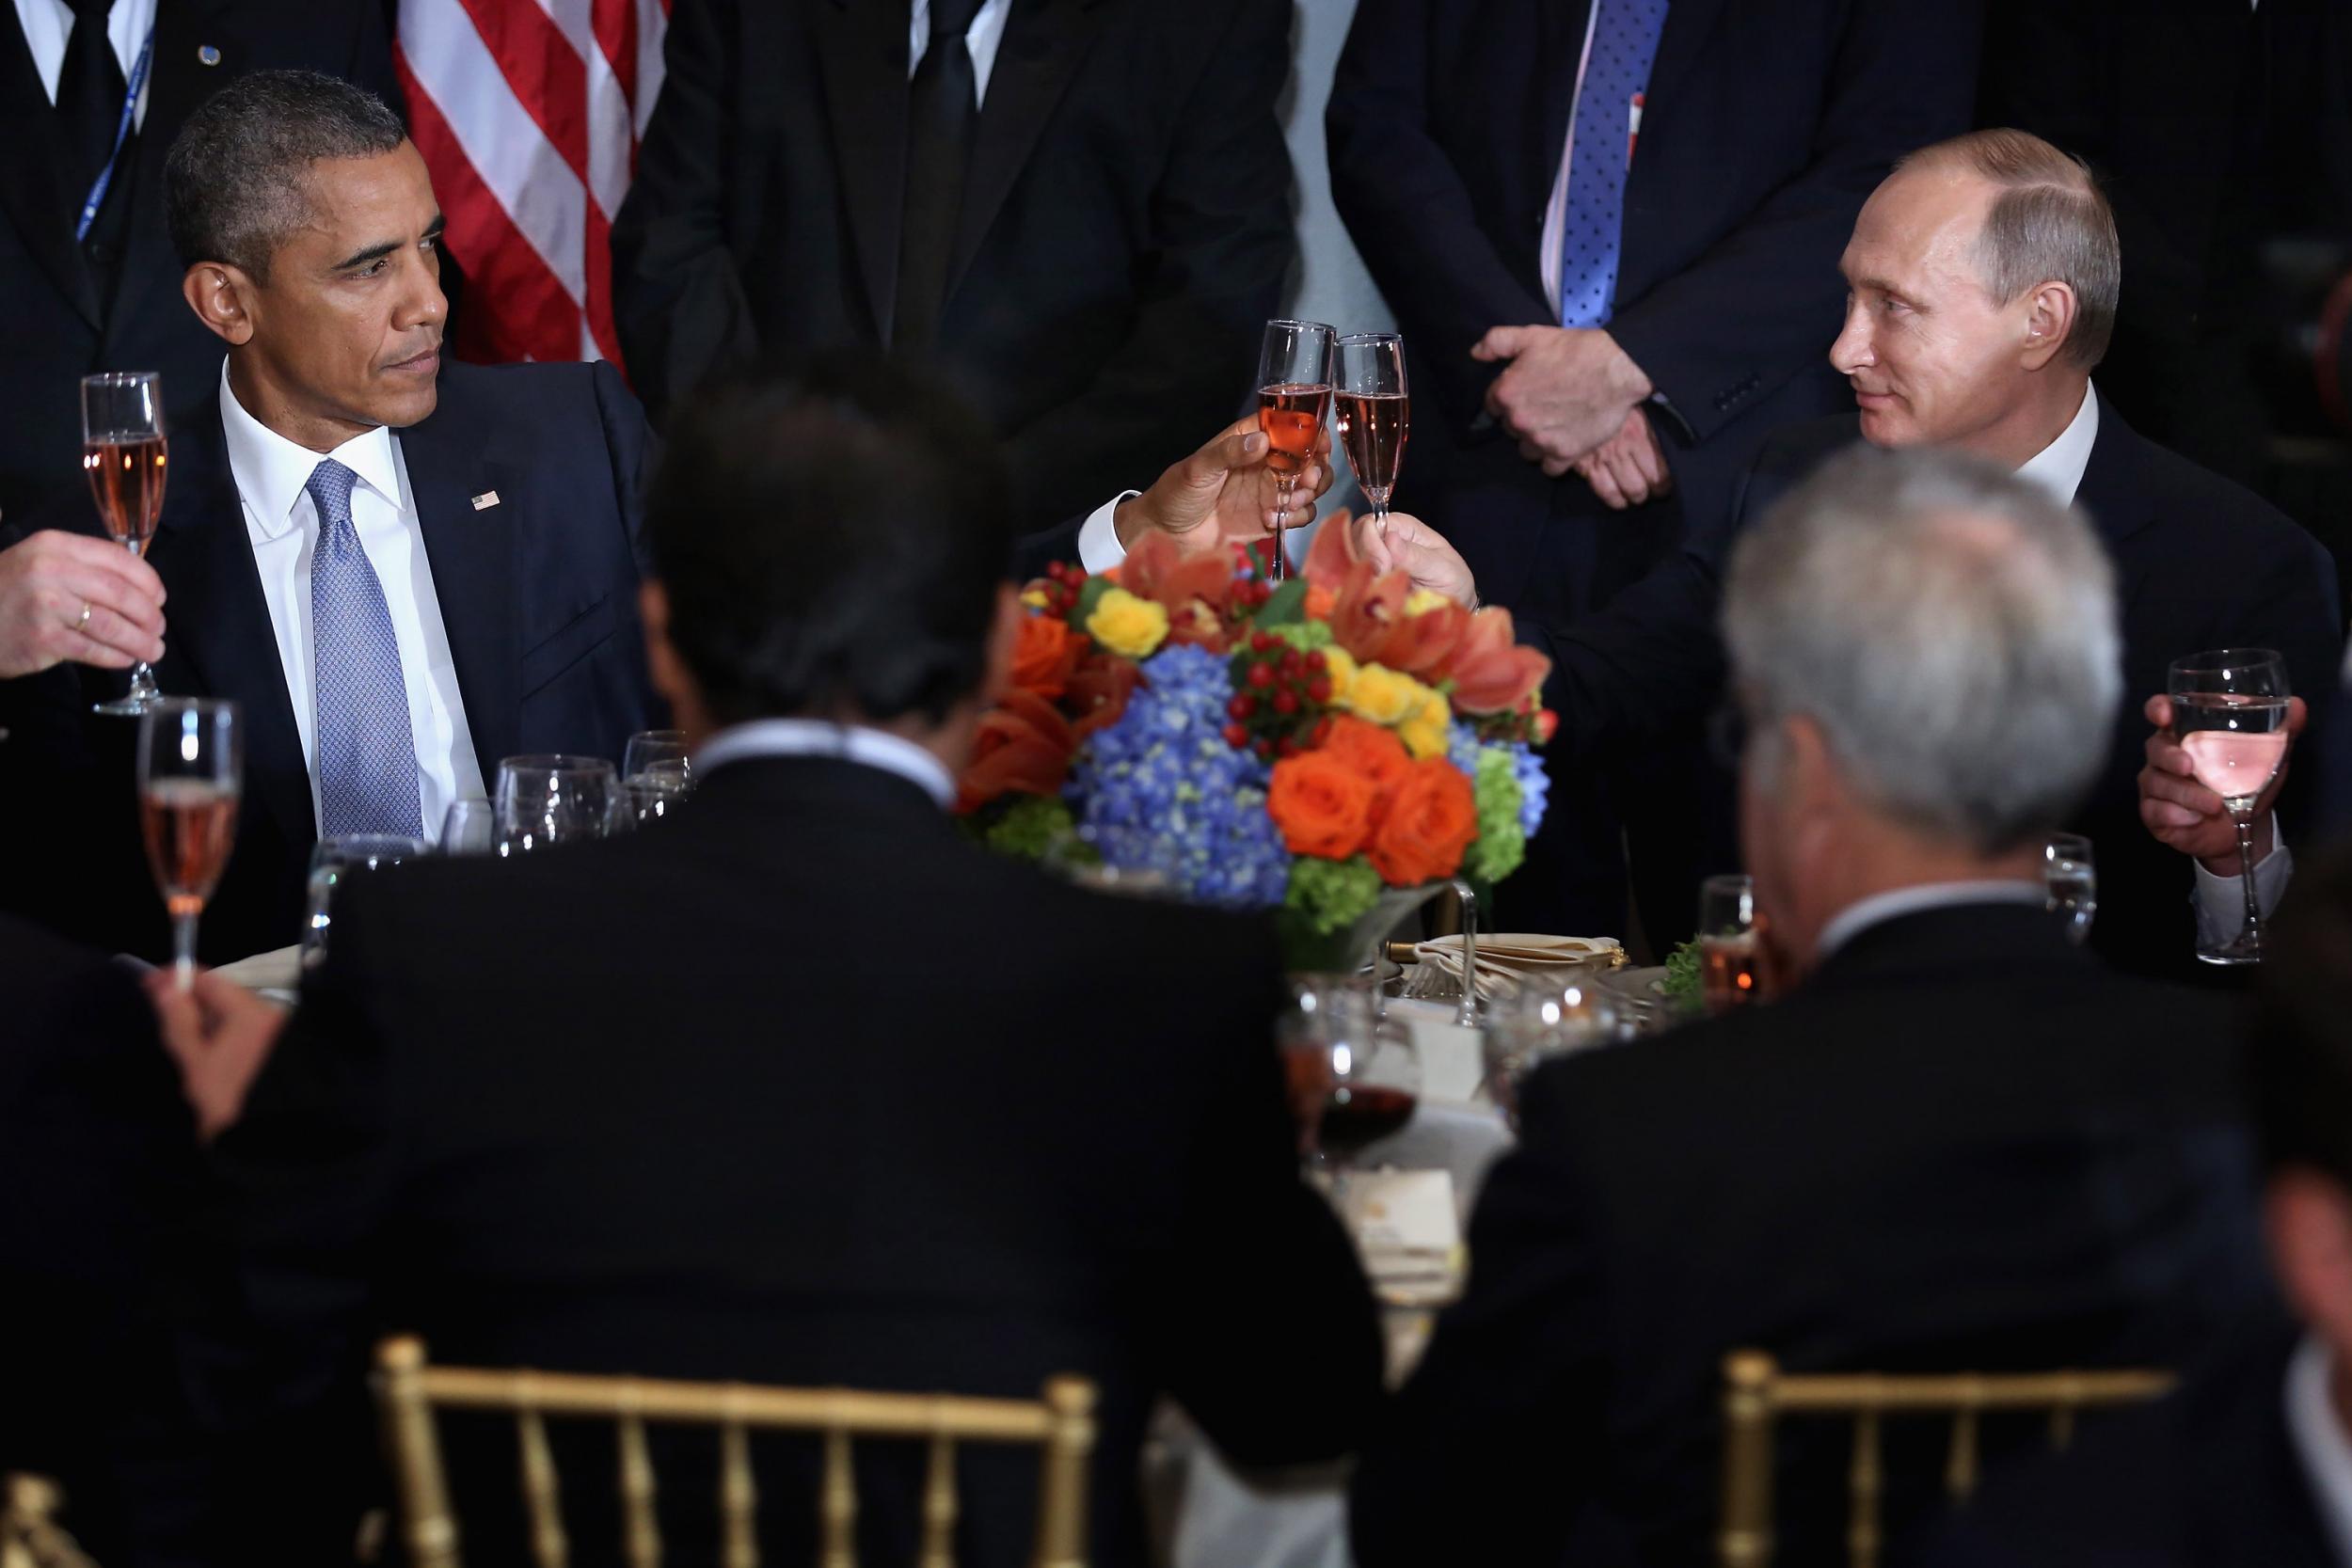 Presidents Barack Obama and Vladimir Putin toast at a UN General Assembly luncheon in September 2015